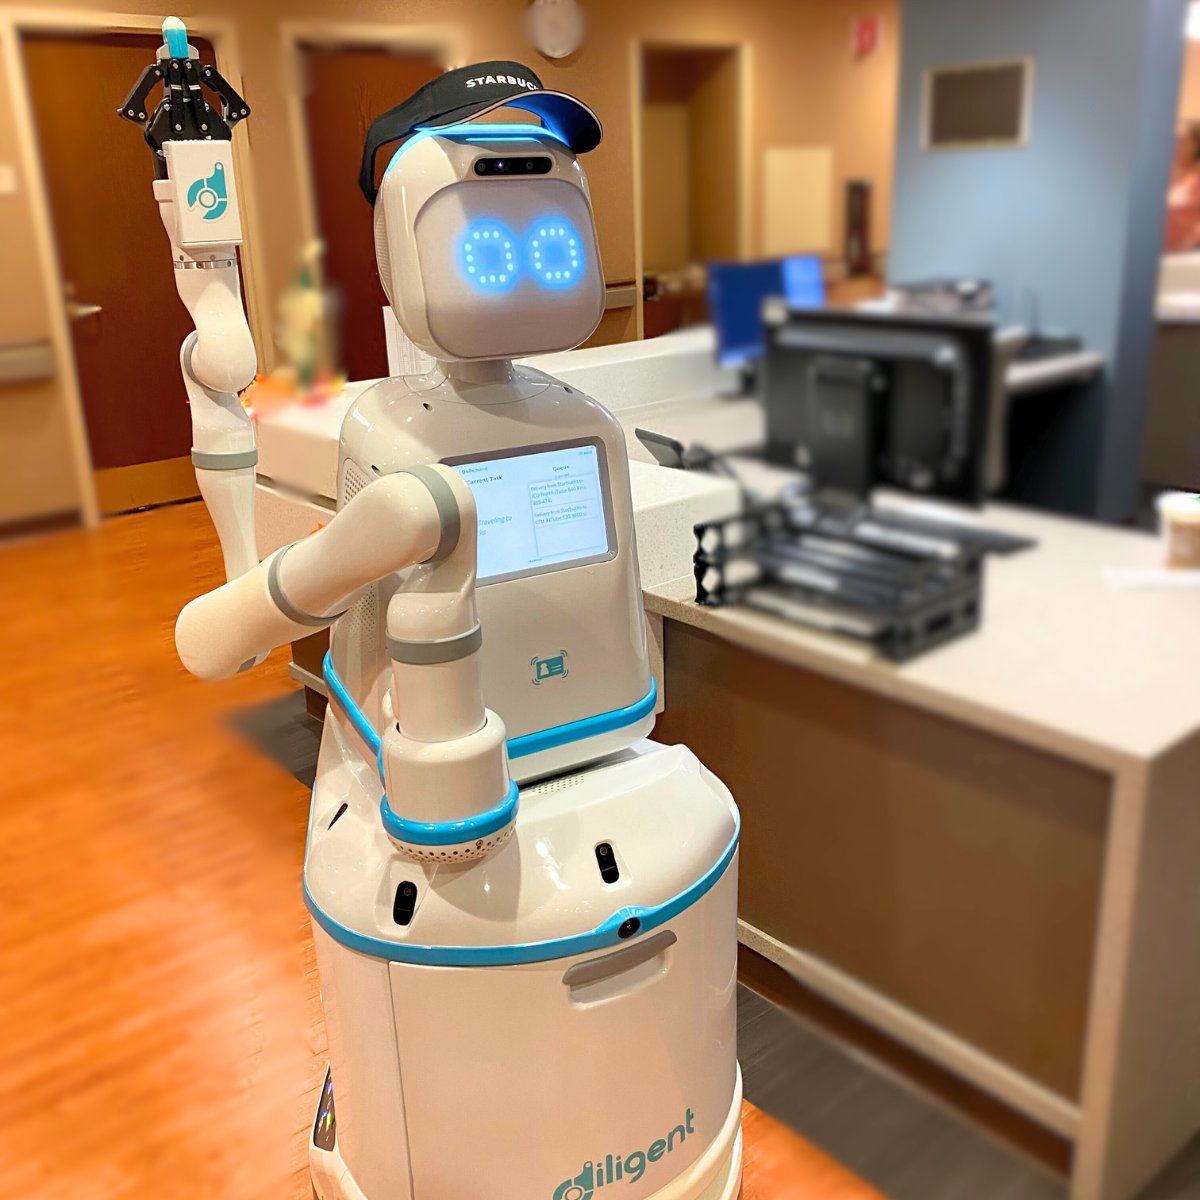 Did someone say COFFEE!? ☕️ @Starbucks outfitted Moxi with an official visor to deliver a Monday morning round of pick-me-ups at @edwardhospital. #coffee #nurselife #moxionthemove #monday #robots